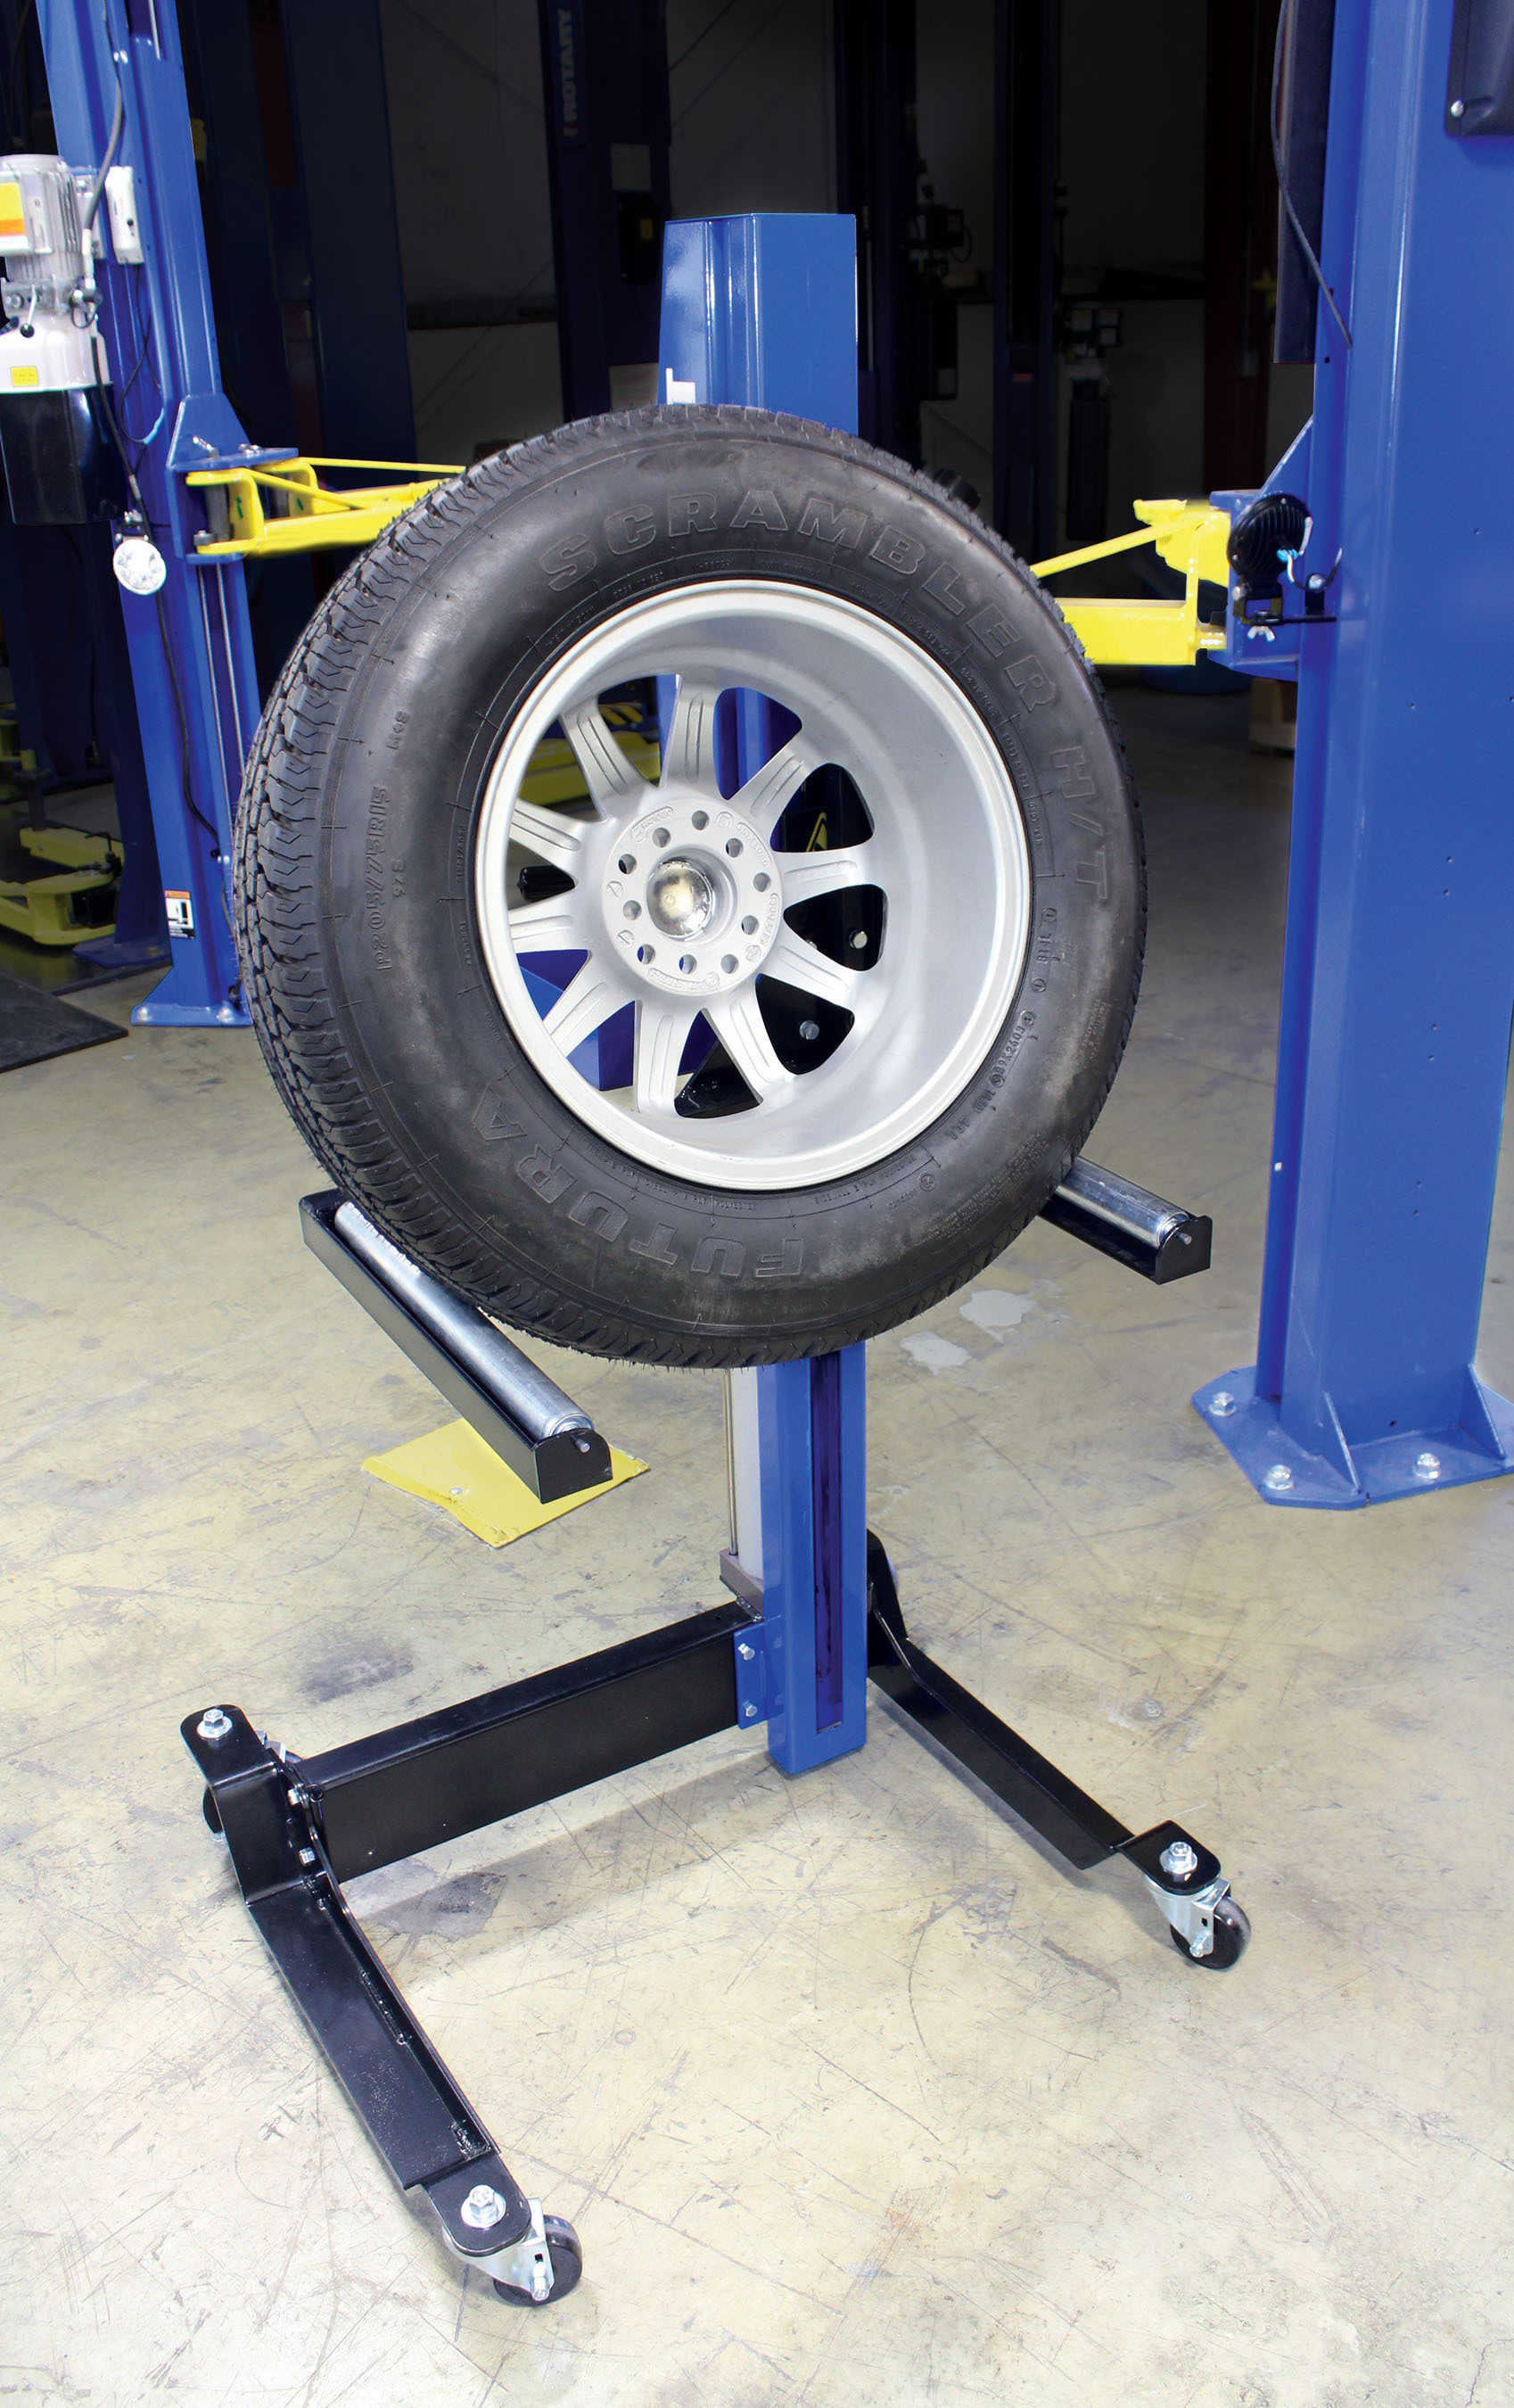 Protect your shop from expensive ceramic disc brake replacement liability with the new MW-200 Mobile Wheel Lift from Rotary Lift. The air-powered MW-200 allows technicians to remove and install wheels correctly and easily to prevent the fragile rotors from being chipped or cracked. Ceramic composite disc brakes are being offered as factory options on a growing number of performance vehicles, but they are susceptible to accidental chipping and cracking during service. (PRNewsFoto/Rotary Lift) (PRNewsFoto/ROTARY LIFT)